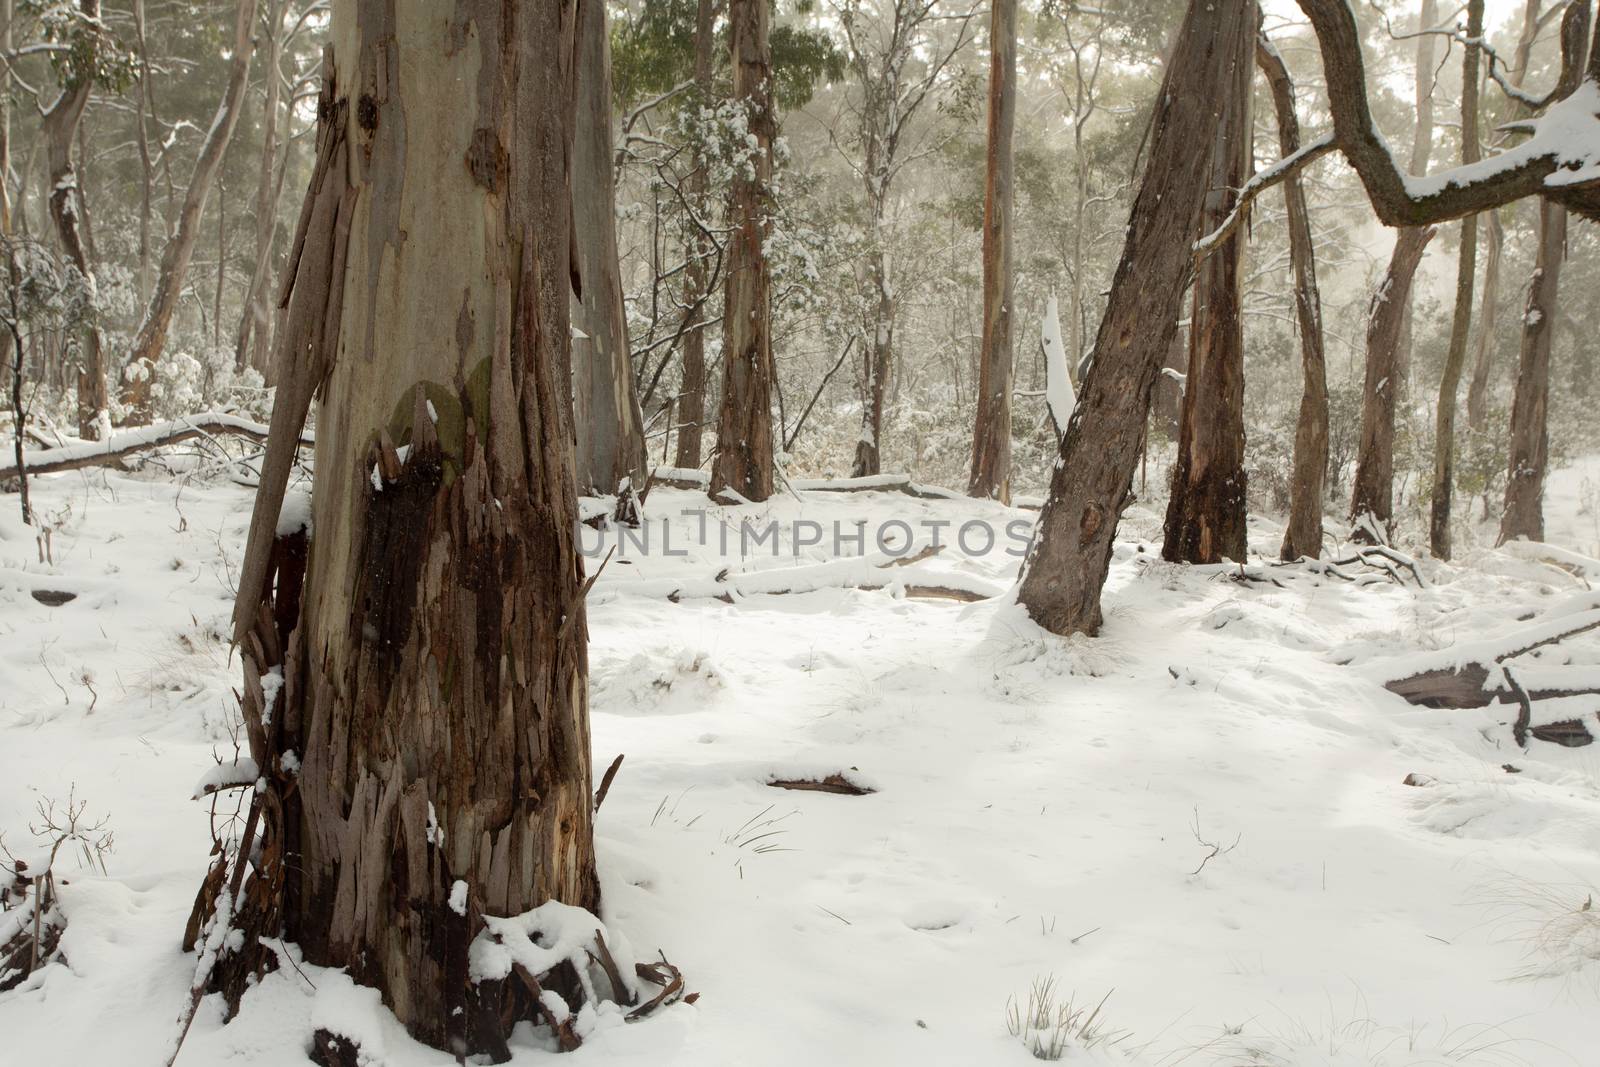 Australian bushland covered in layers of snow and the snow is falling as a hint of sun seeps through the clouds.